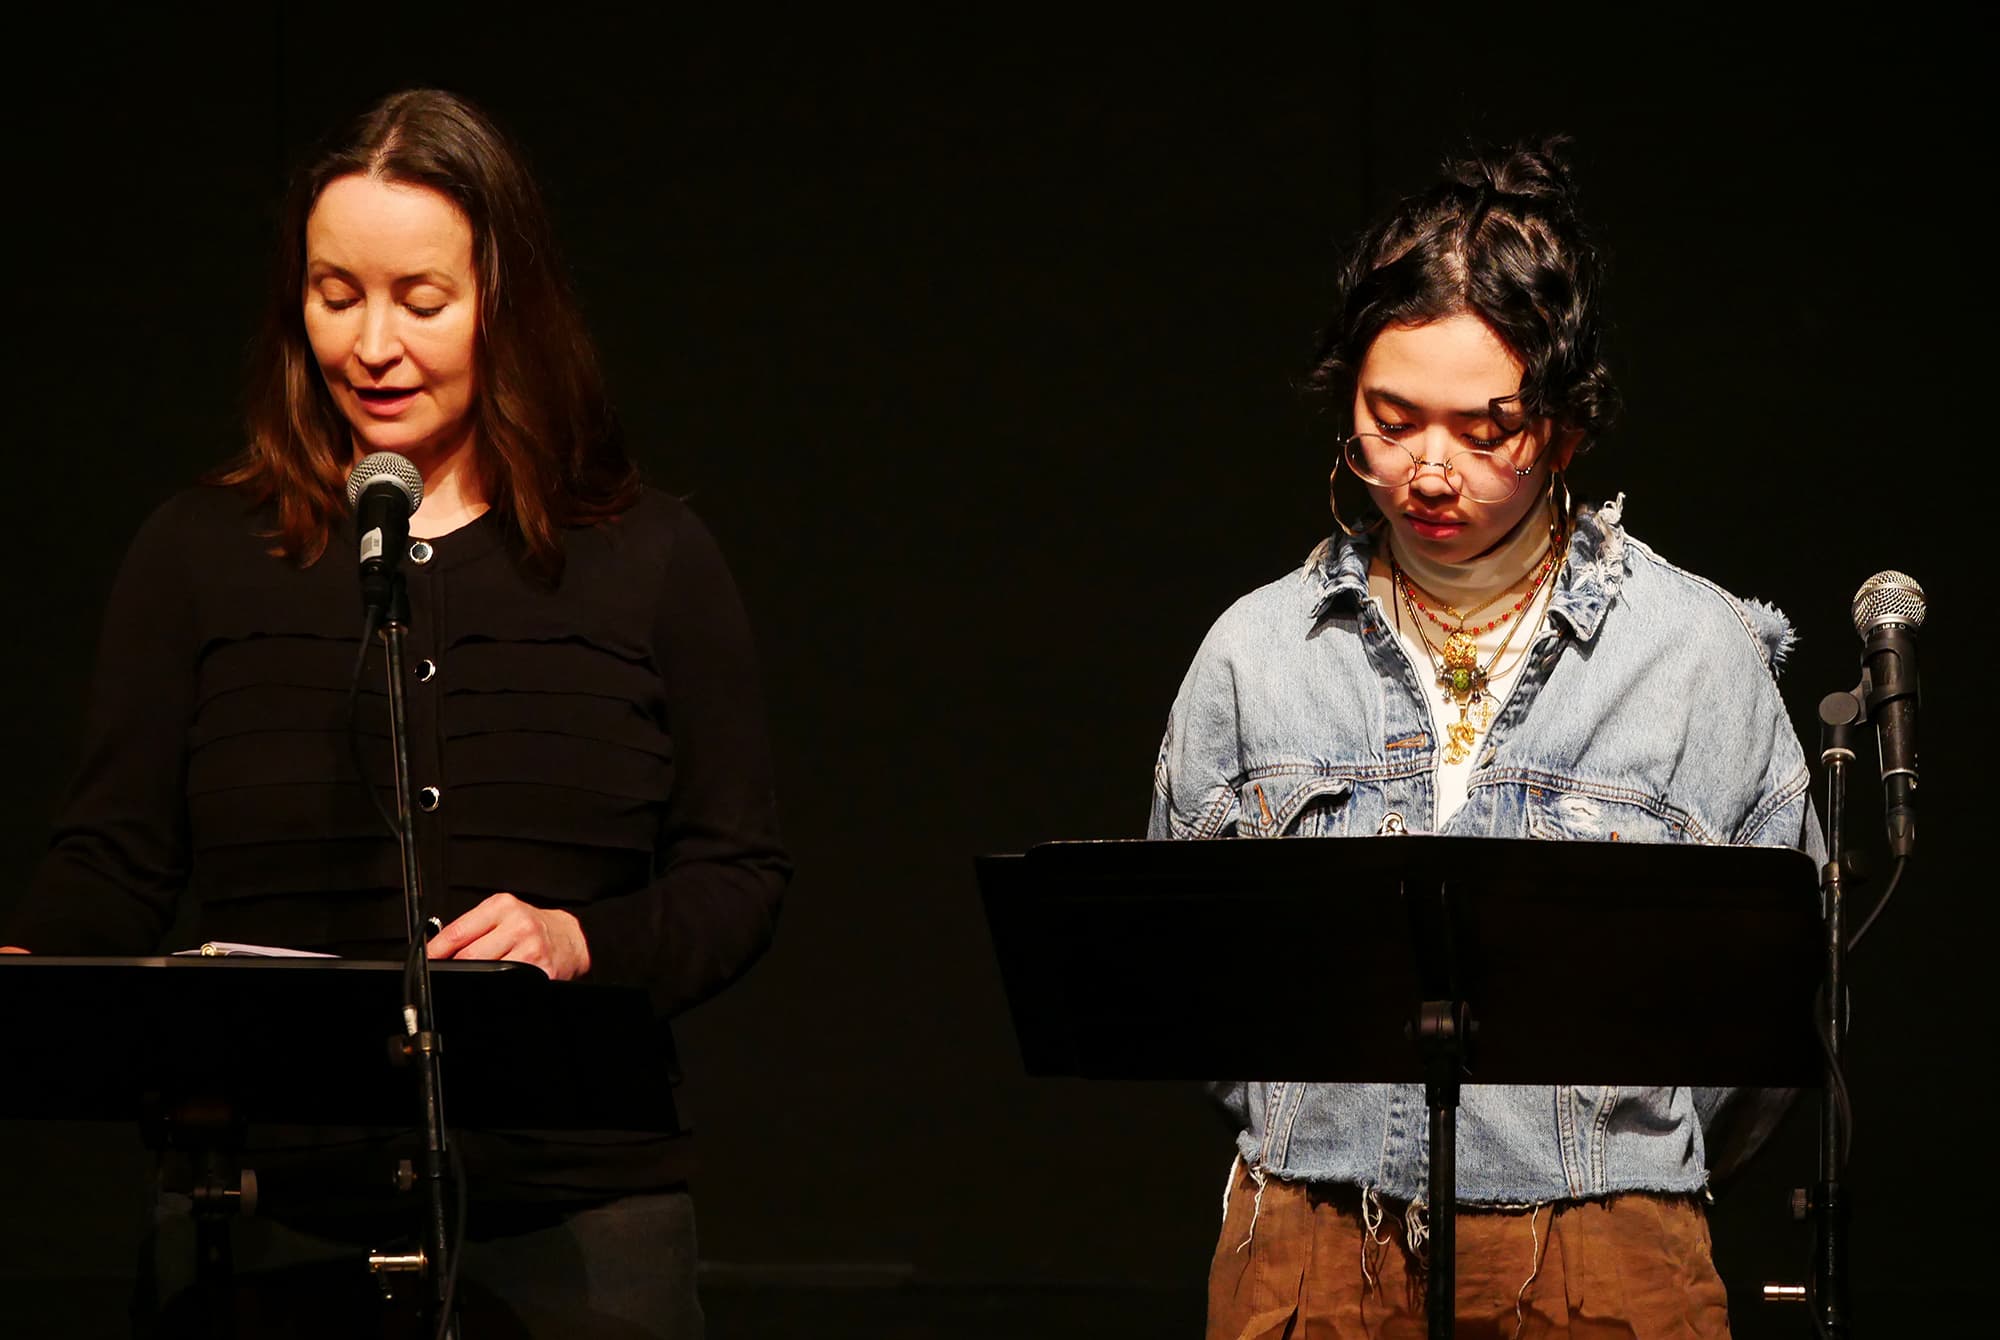 Michelle LeBlanc, a grad from the performing arts program (left) and Bernice Romero De Gracia, a grad from De La Salle University (right) on stage performing one of the 11 plays.